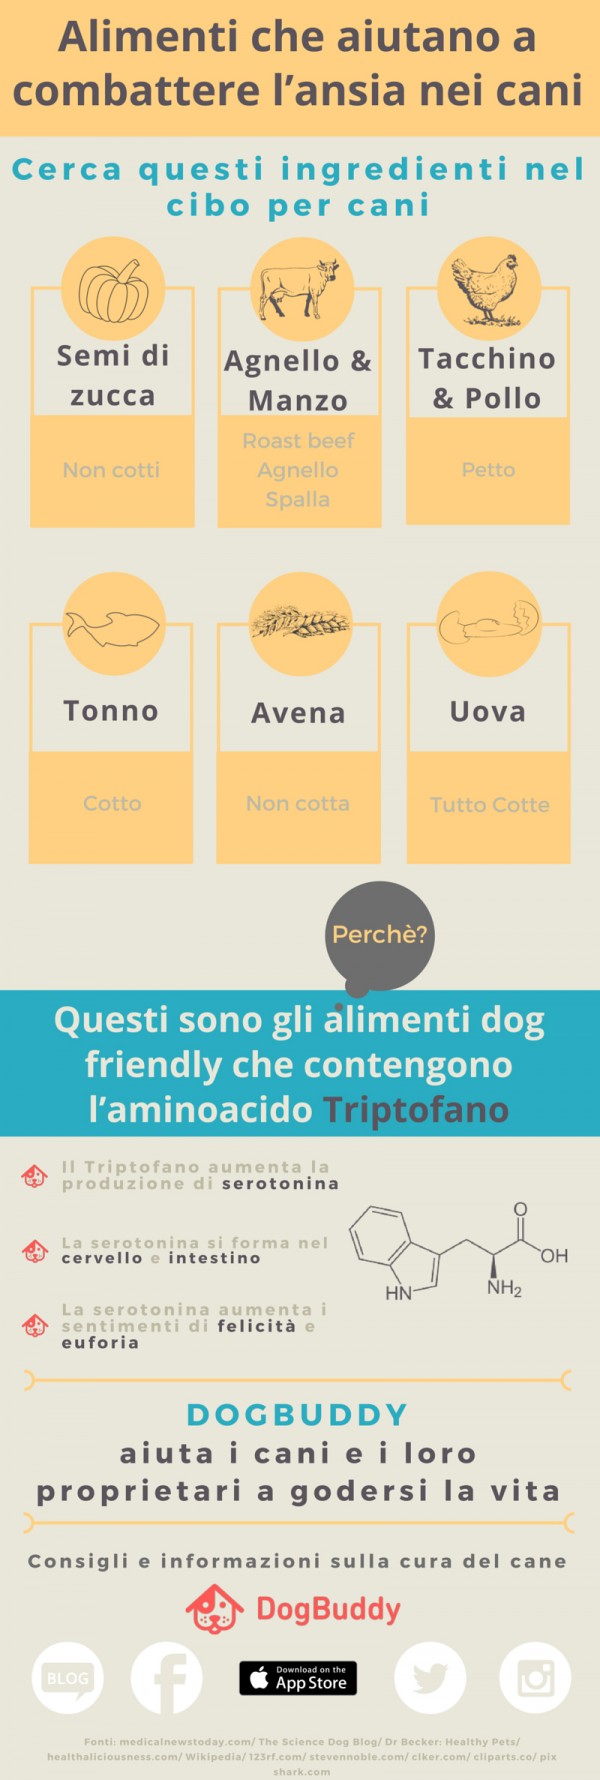 Dogbuddy infographic dog foods IT blog